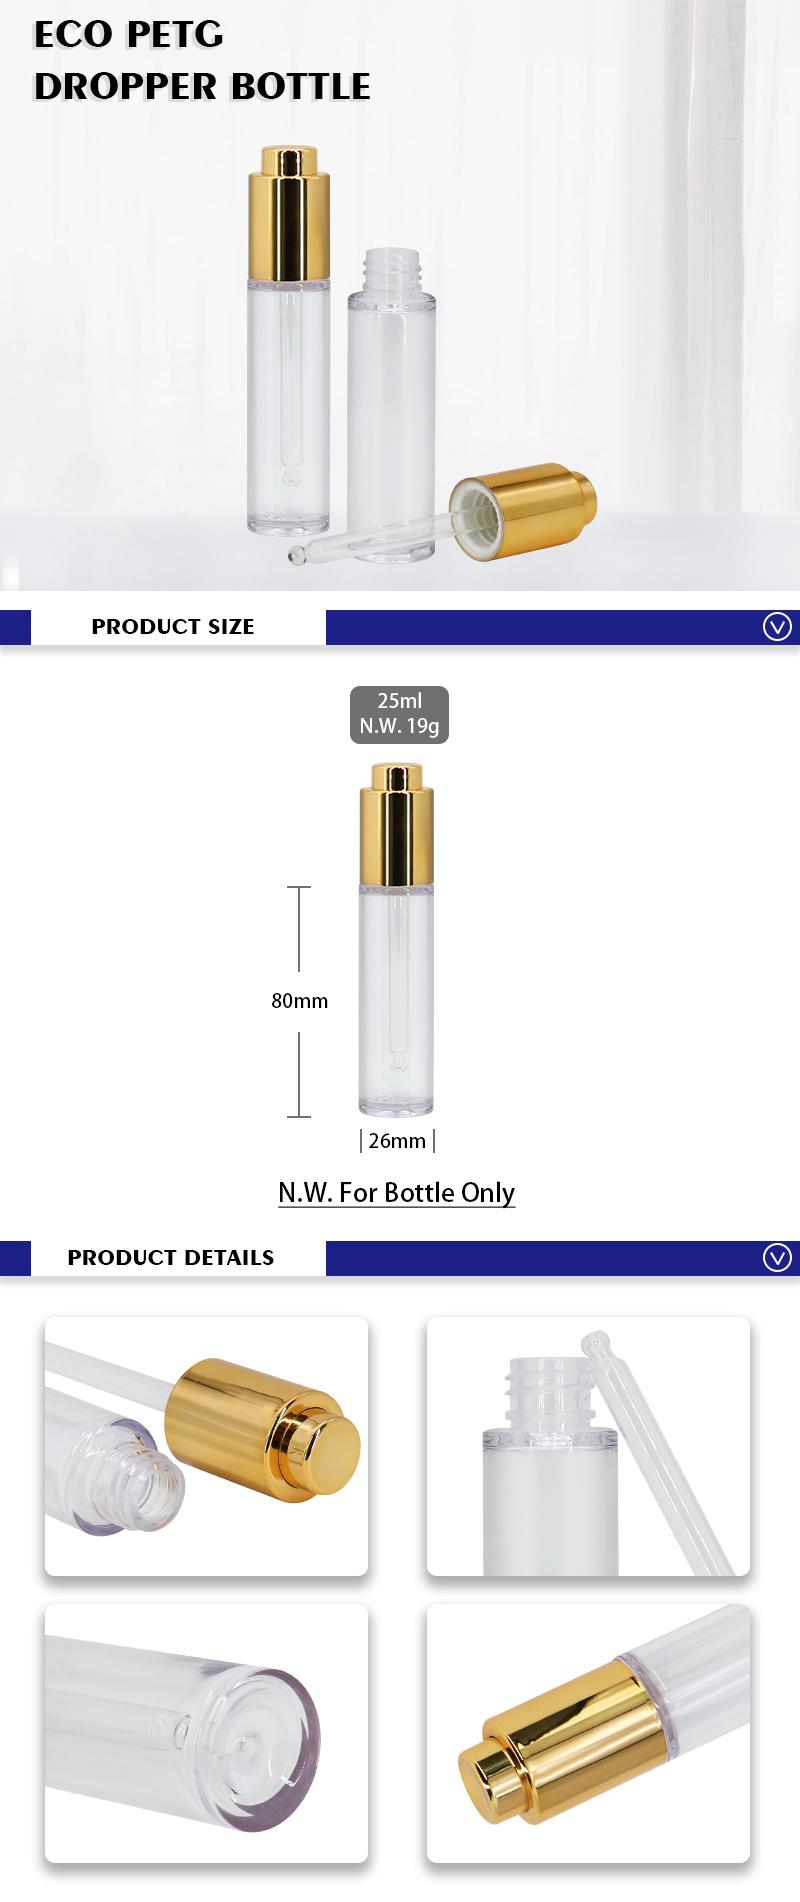 Cosmetic Eco PETG Gold Cover 25ml Drop Cylinder-Shaped Dropper Bottle